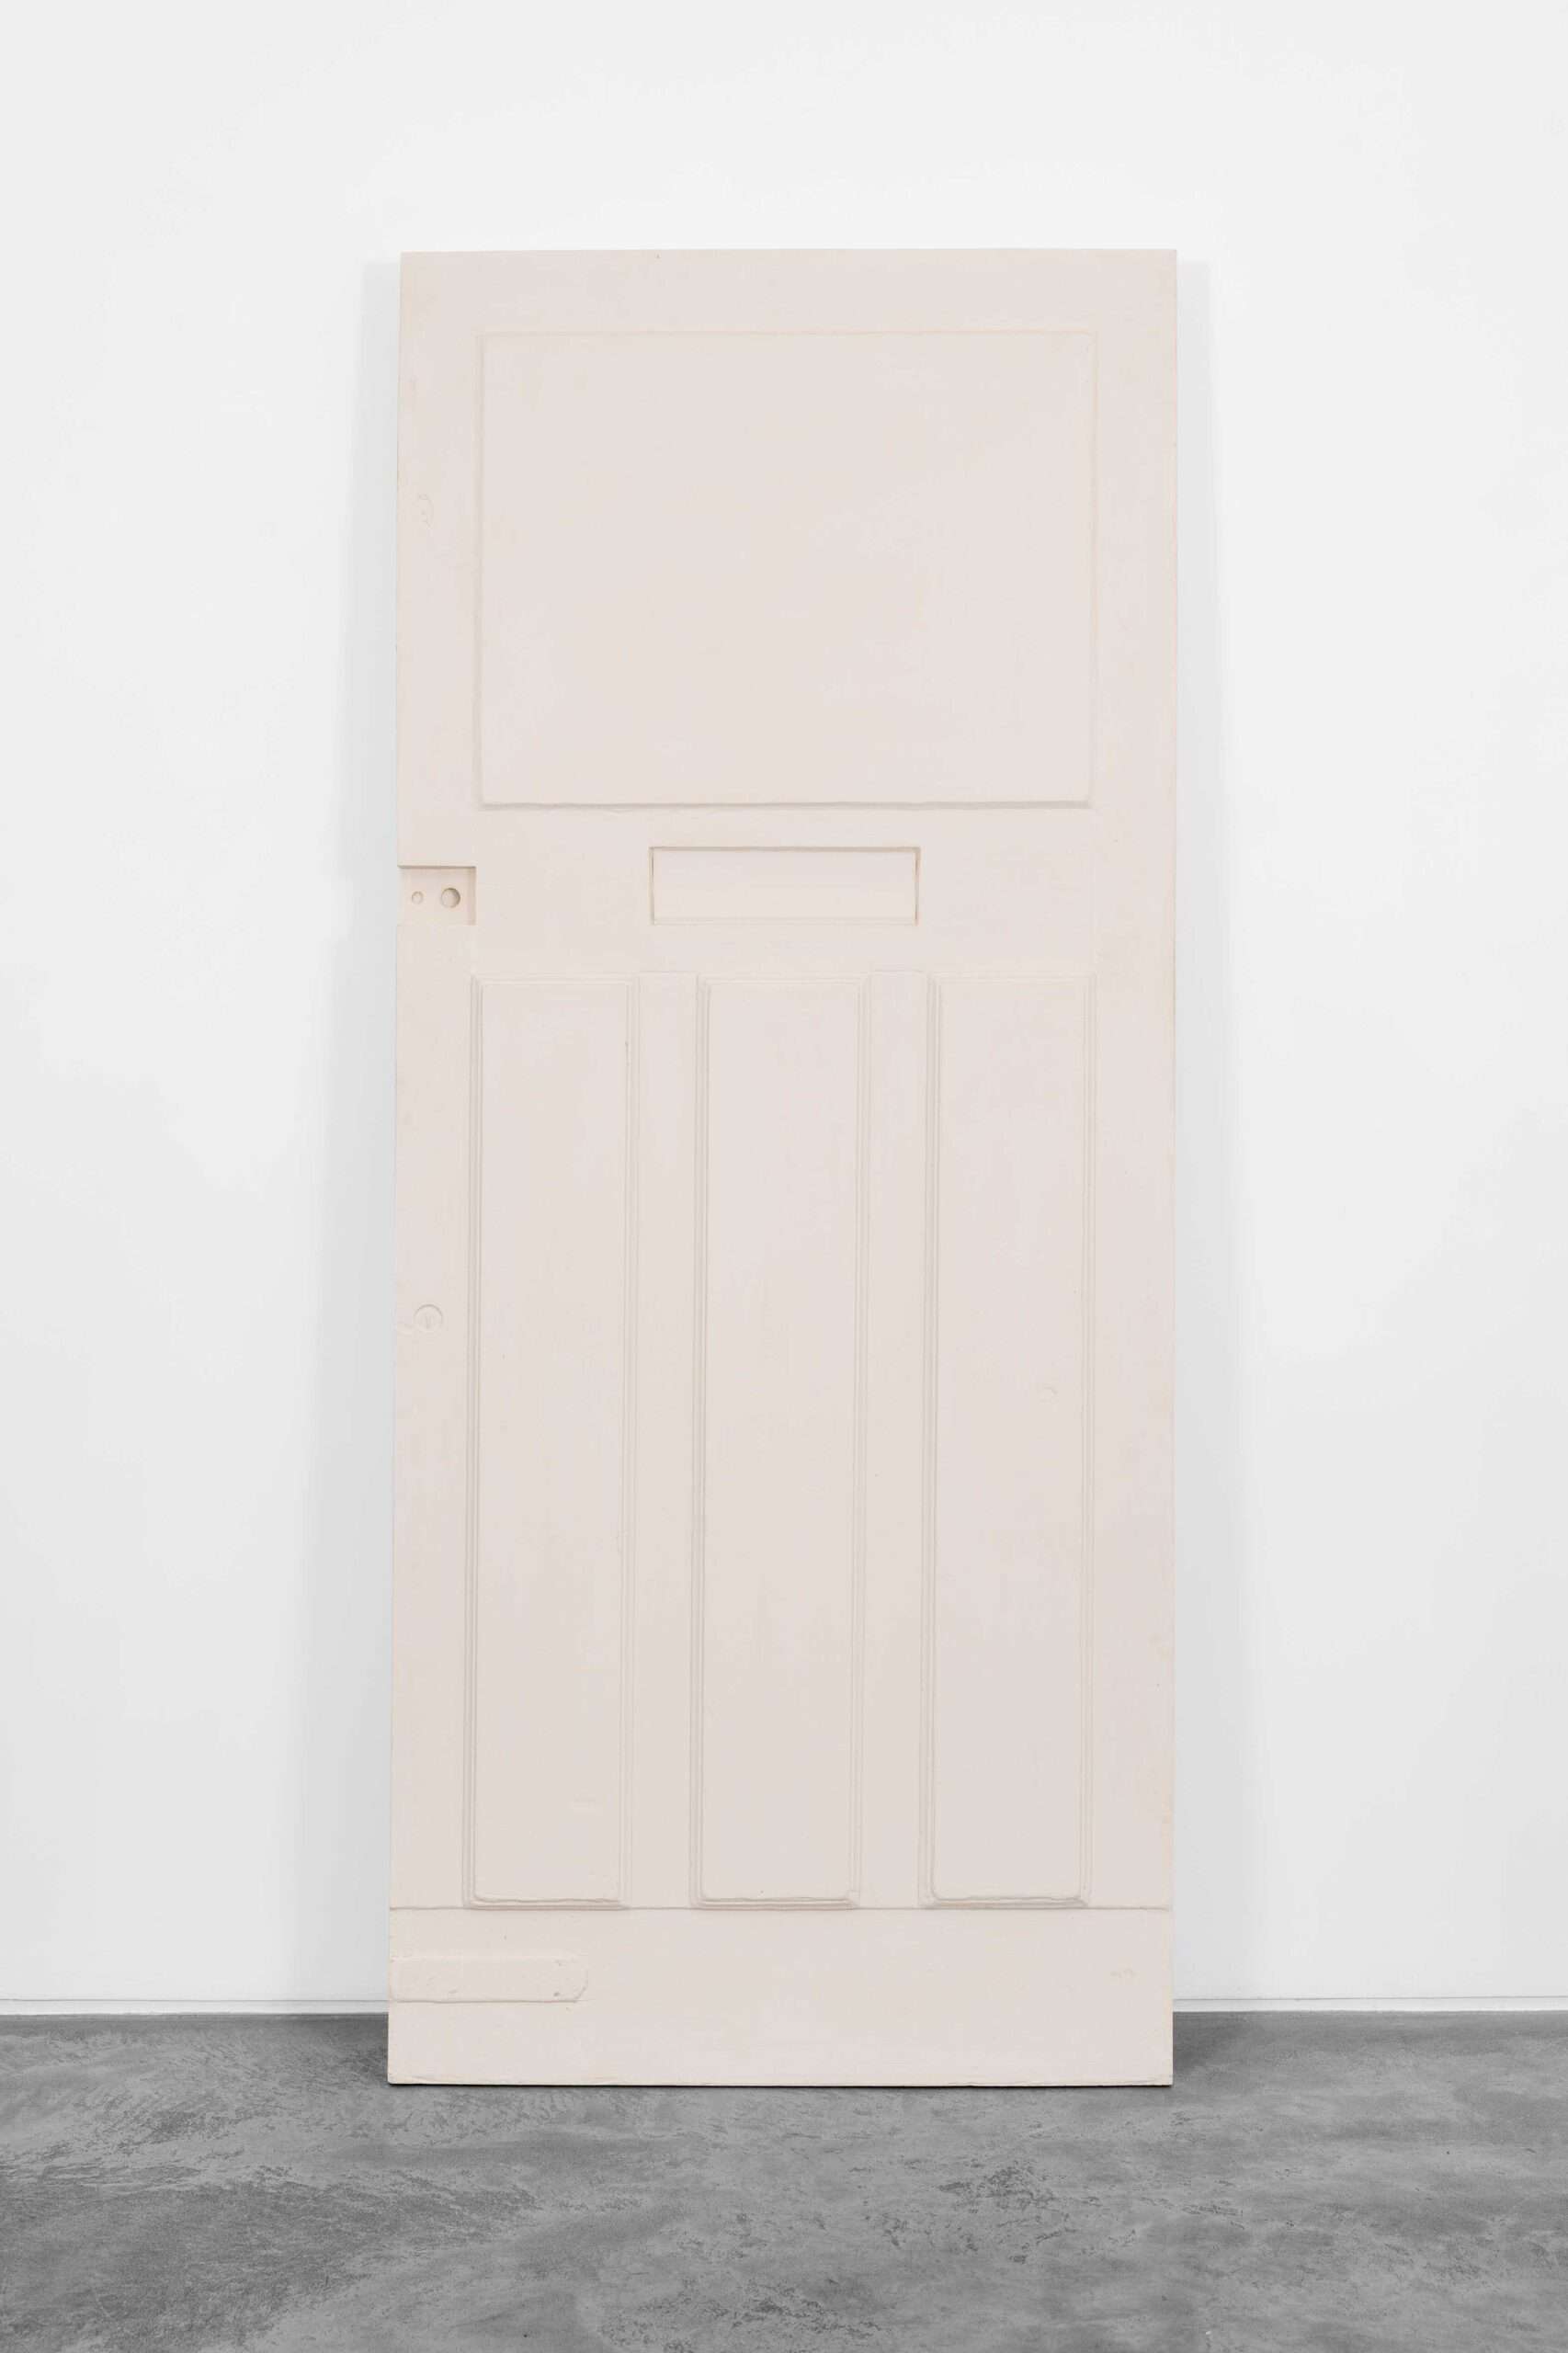 Rachel Whiteread, In Out XIII, 2004, Plasticined plaster with interior aluminium frame work, Time + Place, Huxley-Parlour, 3-5 Swallow Street, March - April 2024